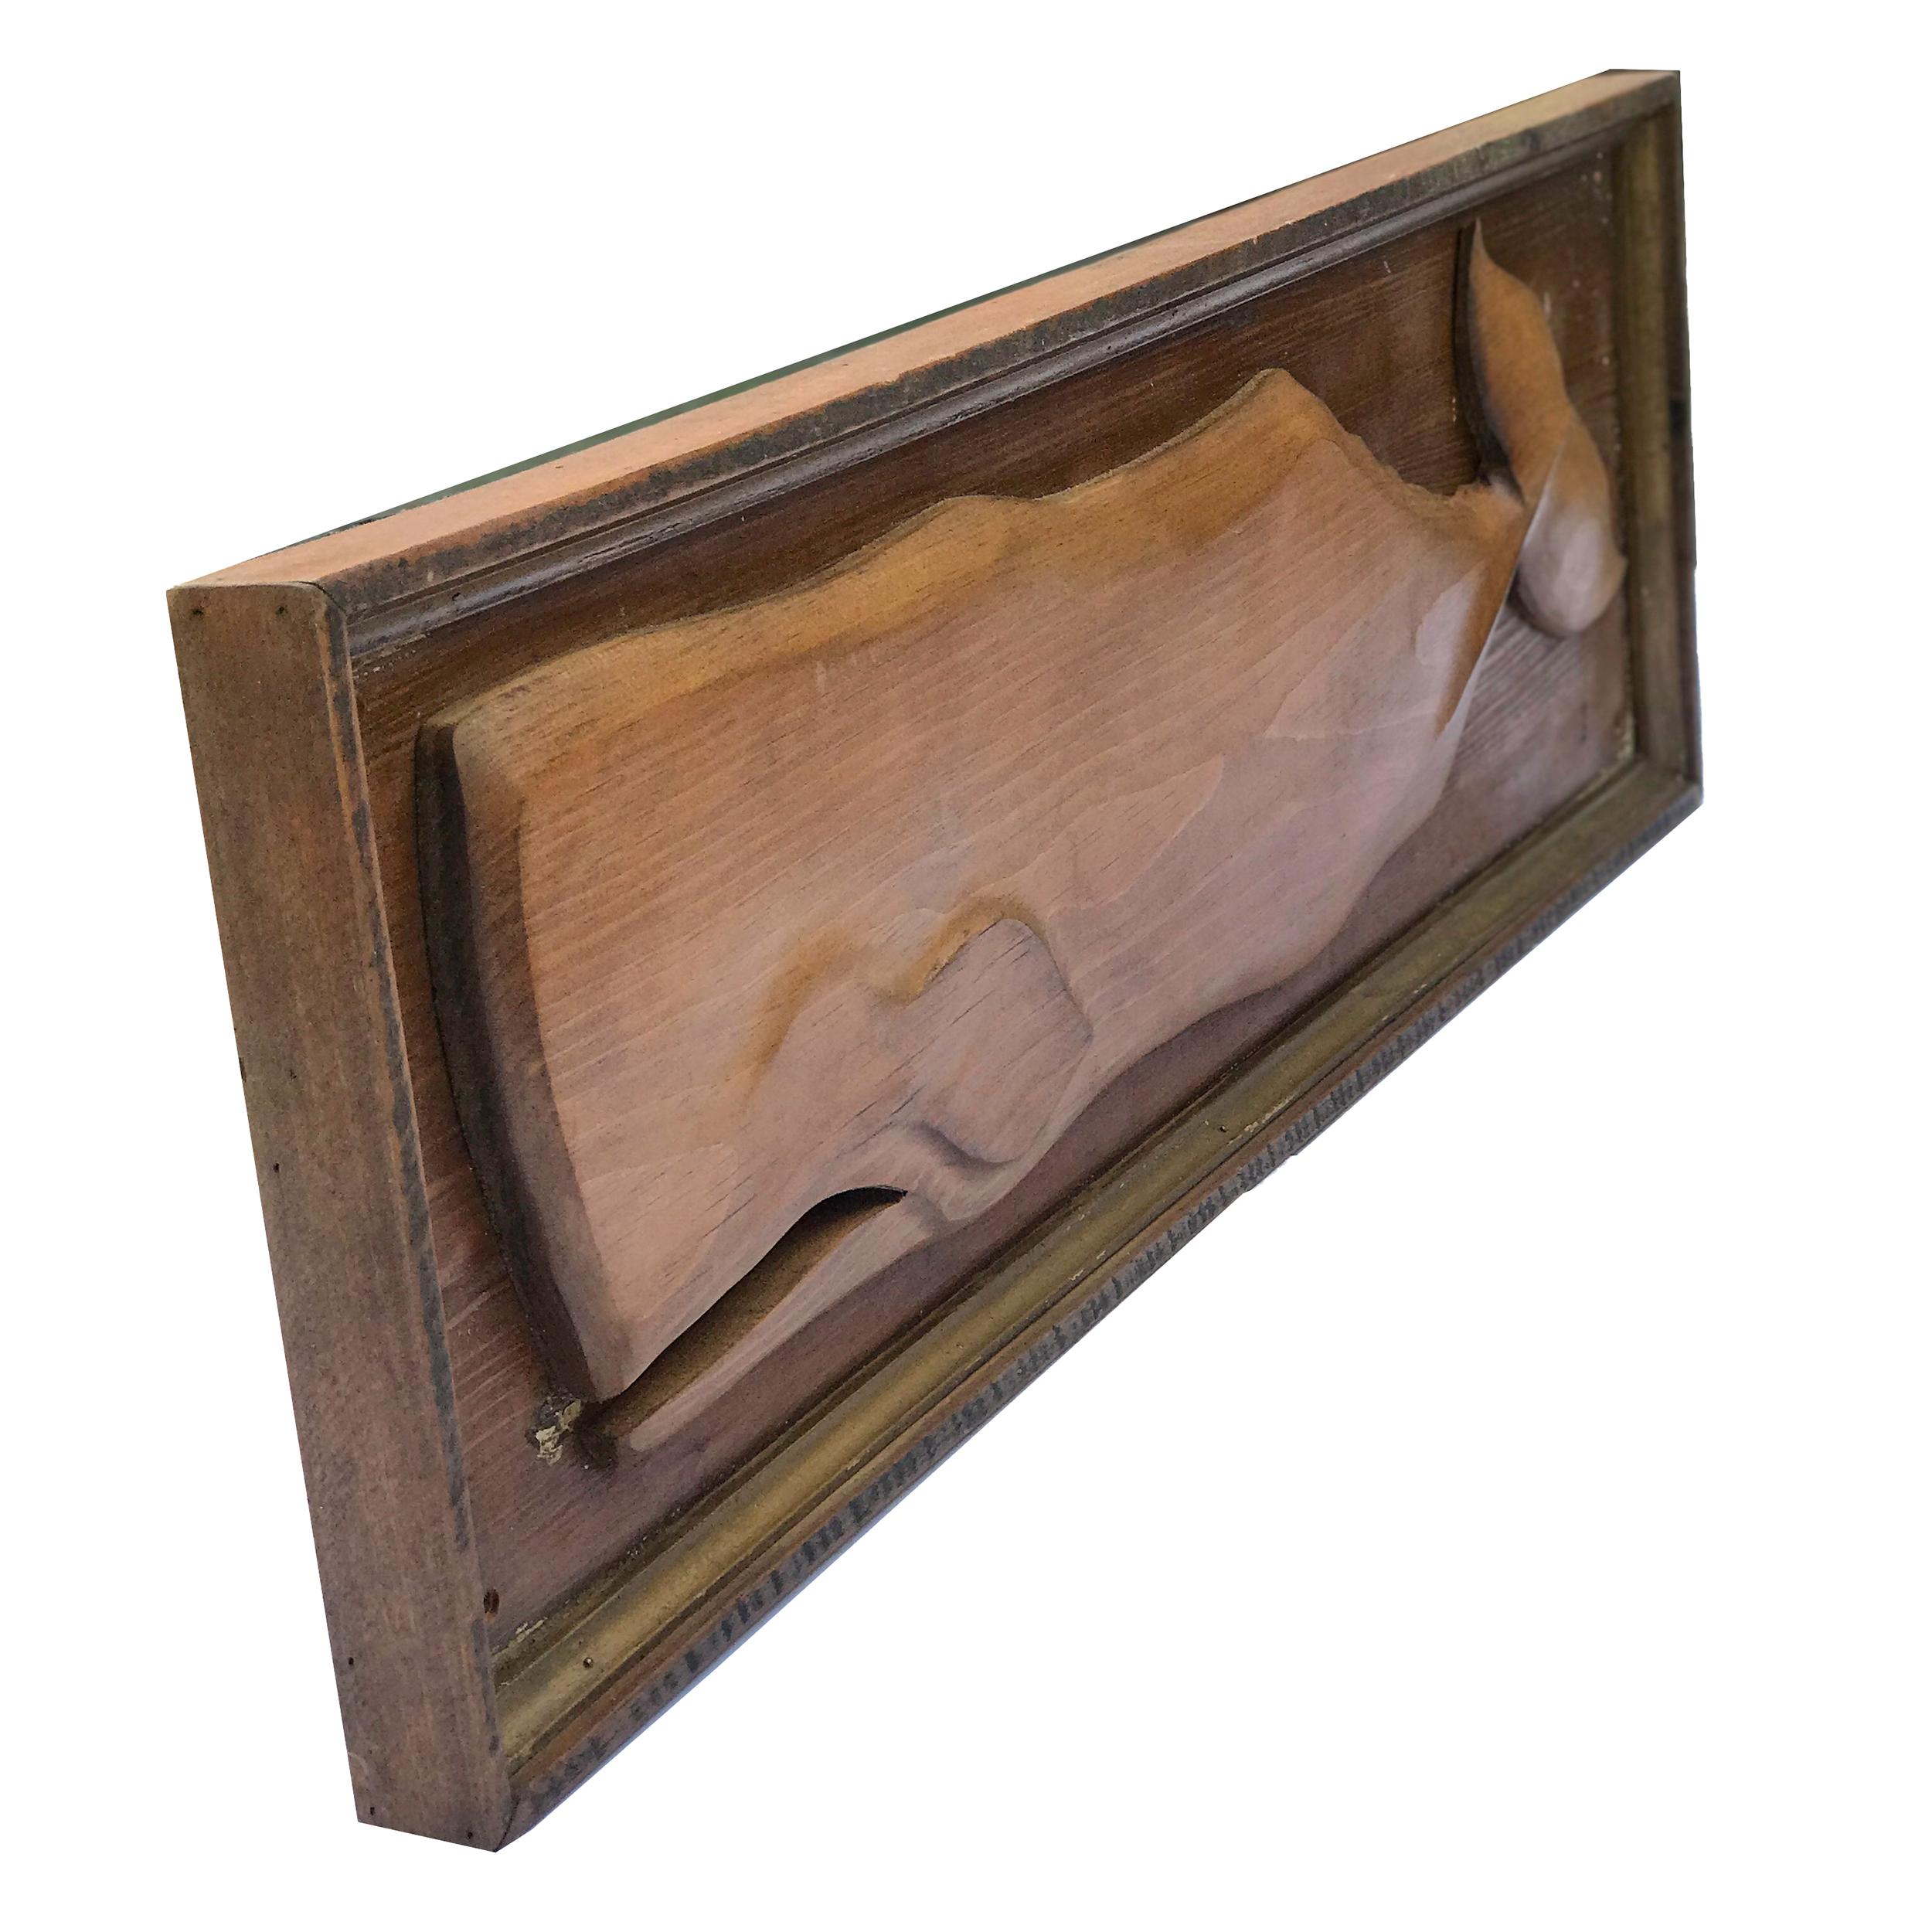 Sperm whale is carved from pine and mounted on oak, the frame is quarter sawn oak with gold painted molded liner.